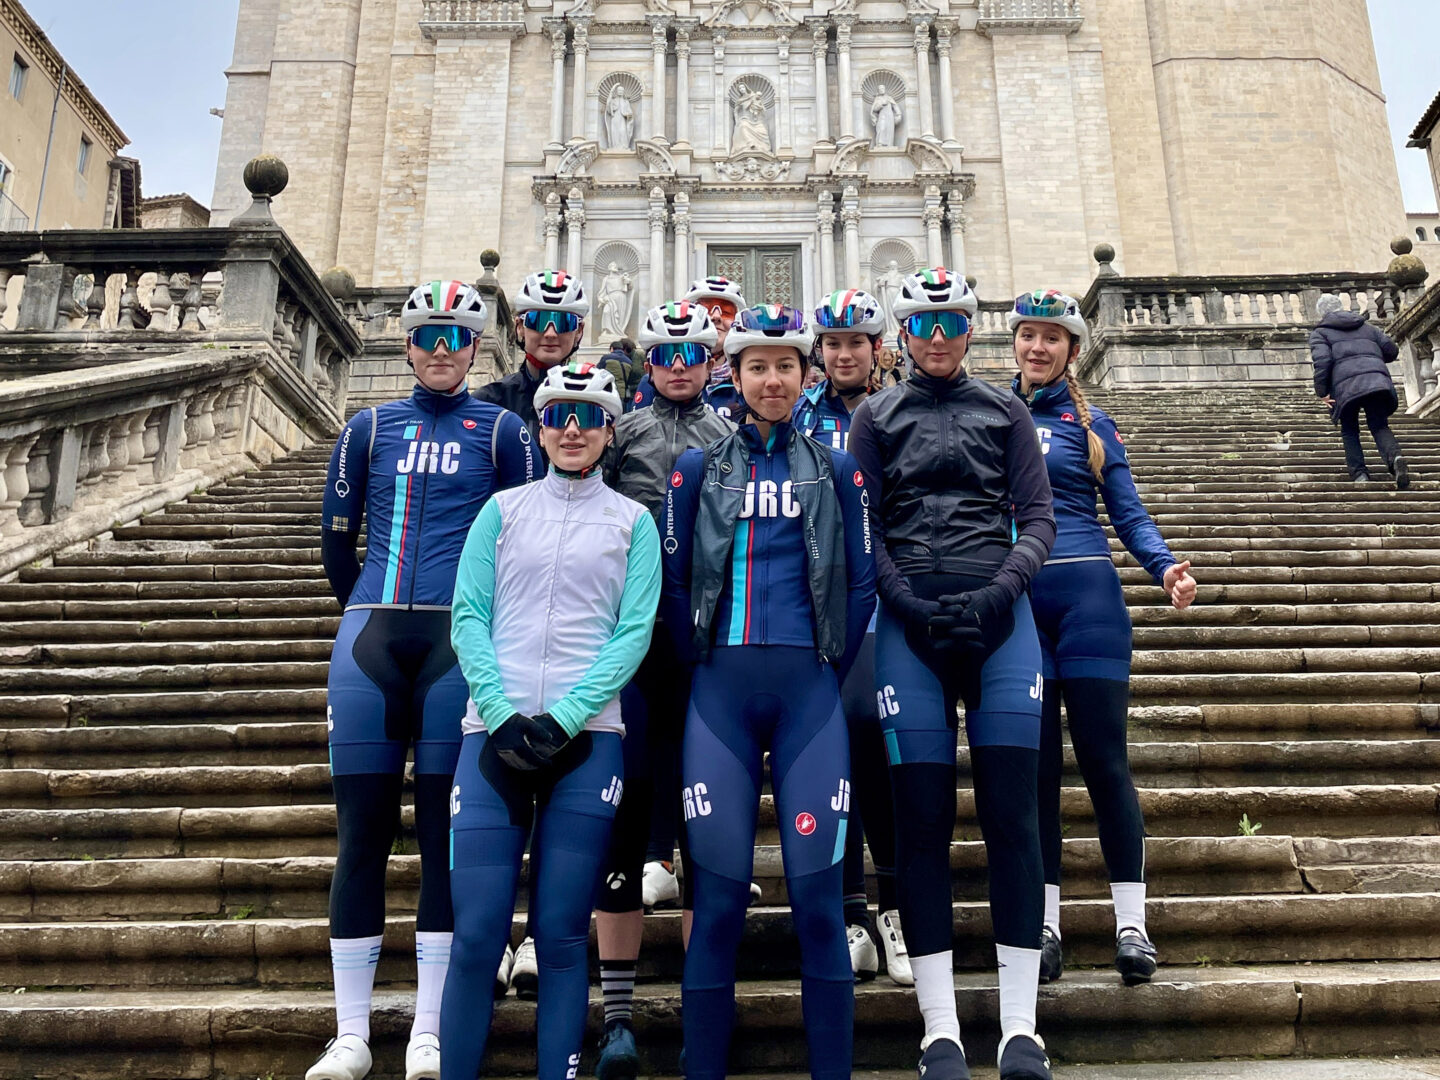 Team members of the JRC Women's Junior Cycling Team stand together on ancient stone steps in Girona.